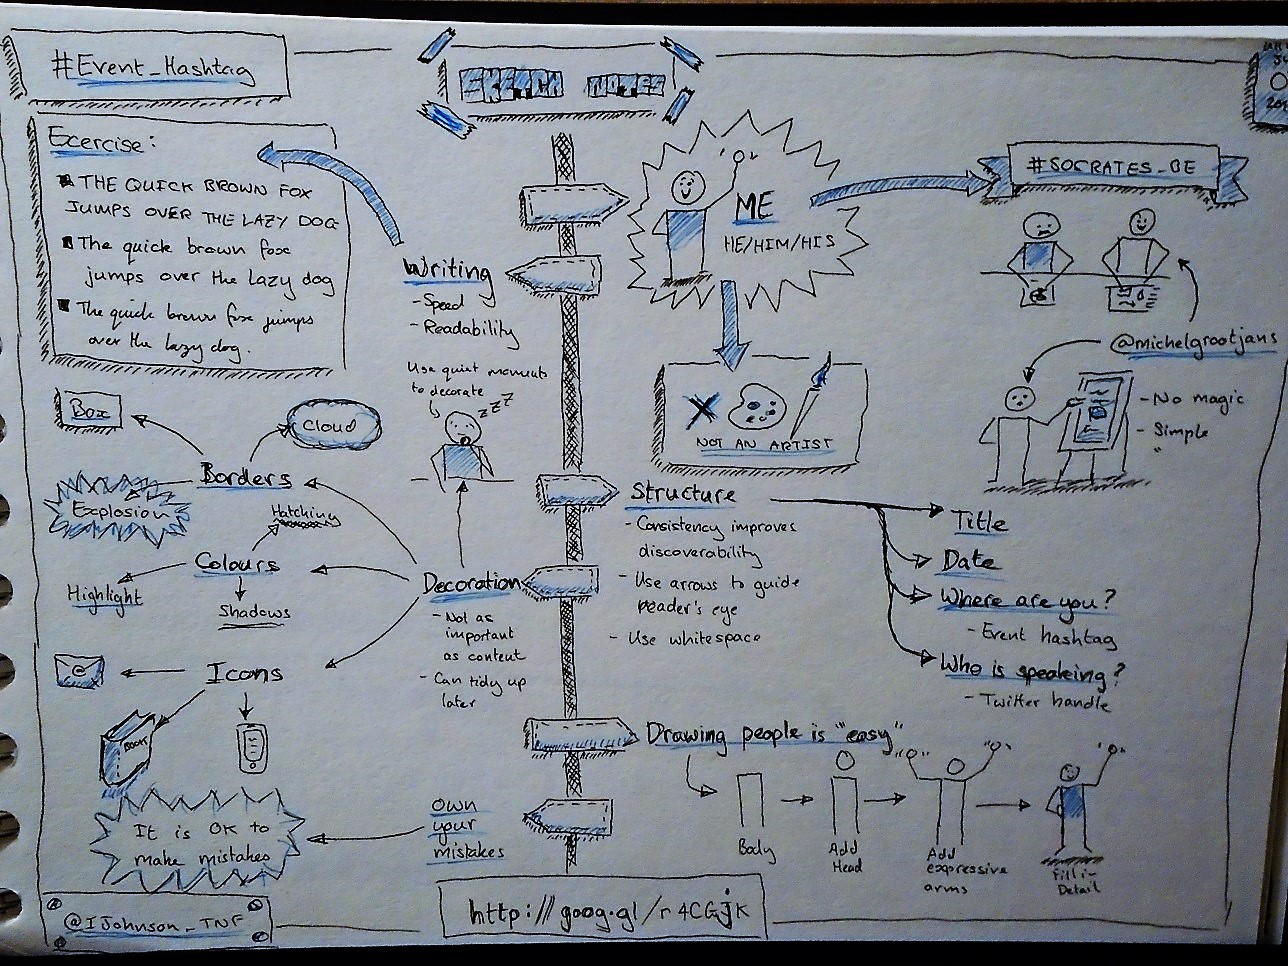 A copy of the final sketchnote done in black and light blue fountain pens